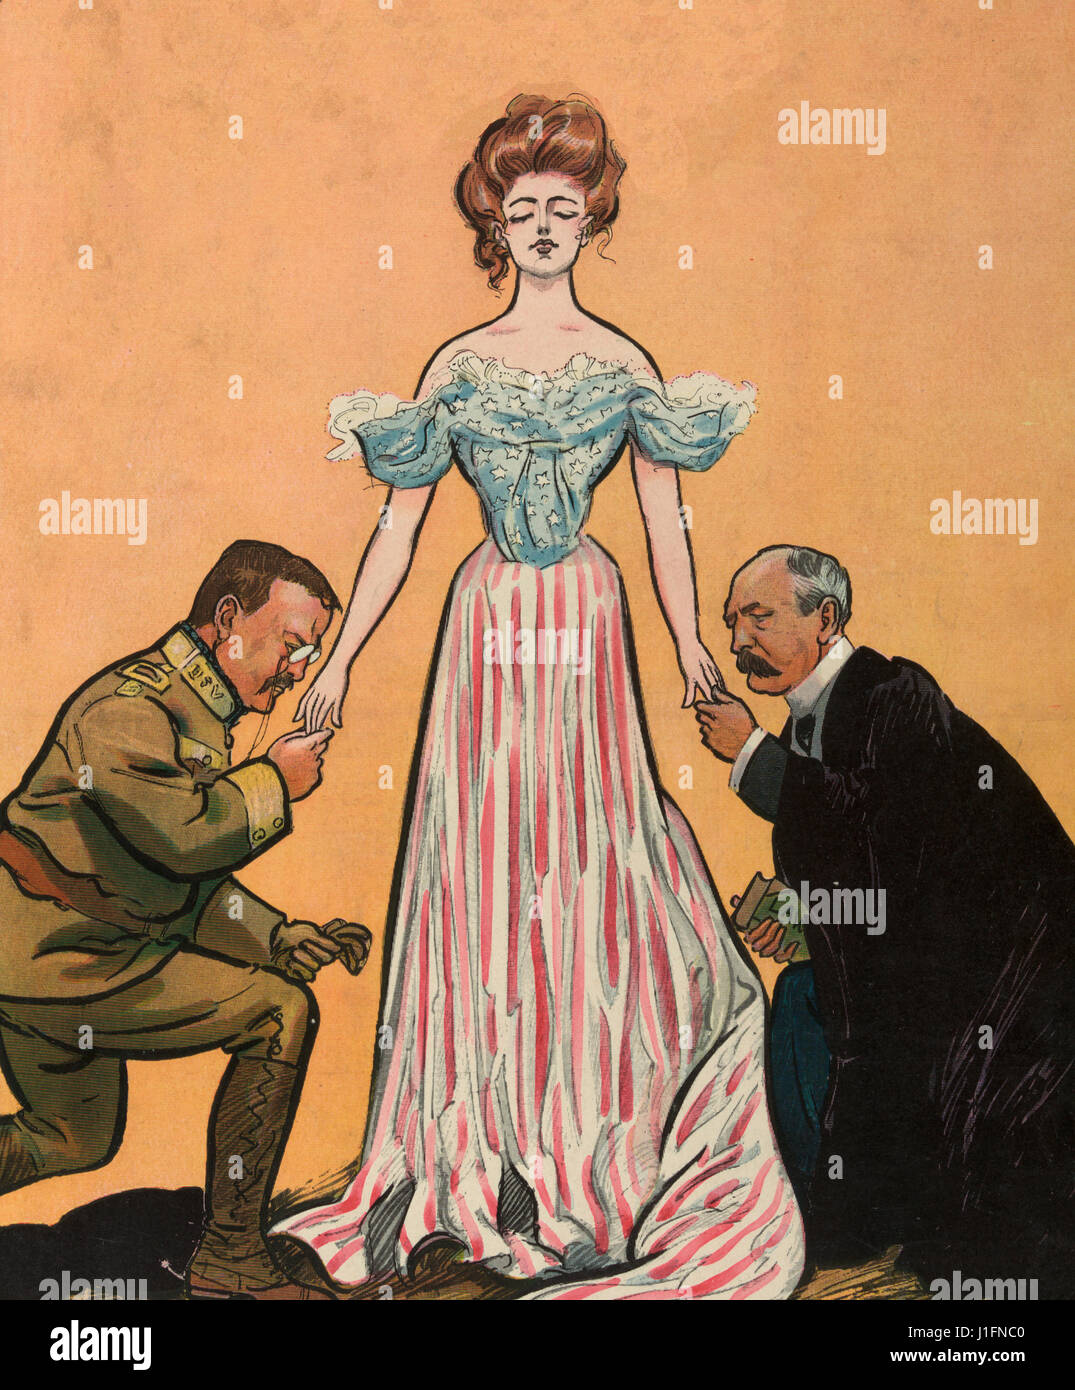 Campaign number -  Illustration shows Columbia standing between President Theodore Roosevelt and Alton B. Parker, each kneeling on one knee, about to kiss her hands. Political Cartoon, 1904 Stock Photo